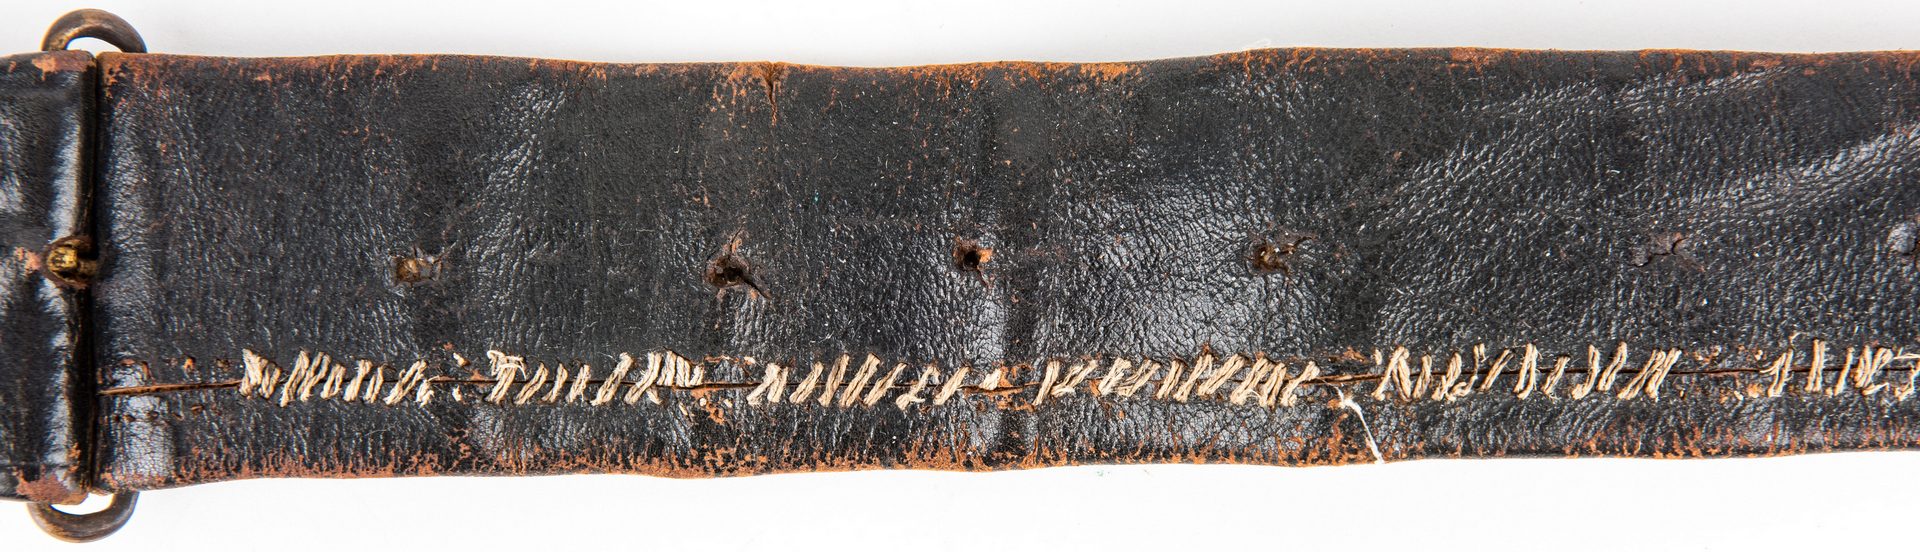 Lot 269: Confederate LA Officer's Sword Belt with Plate on Leather